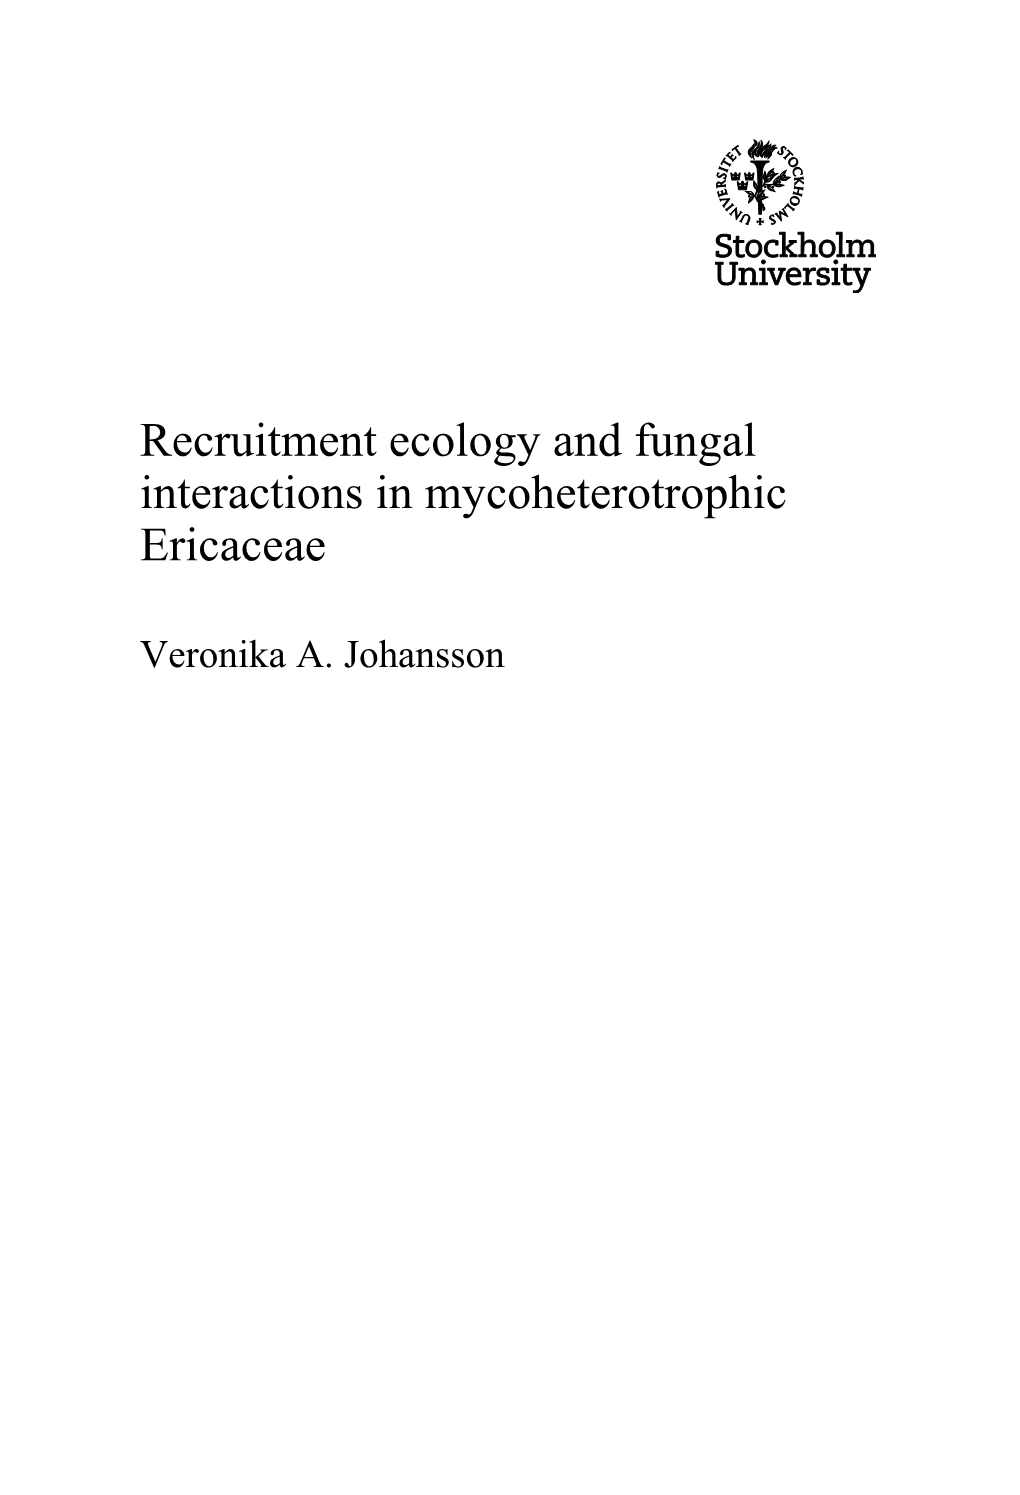 Recruitment Ecology and Fungal Interactions in Mycoheterotrophic Ericaceae